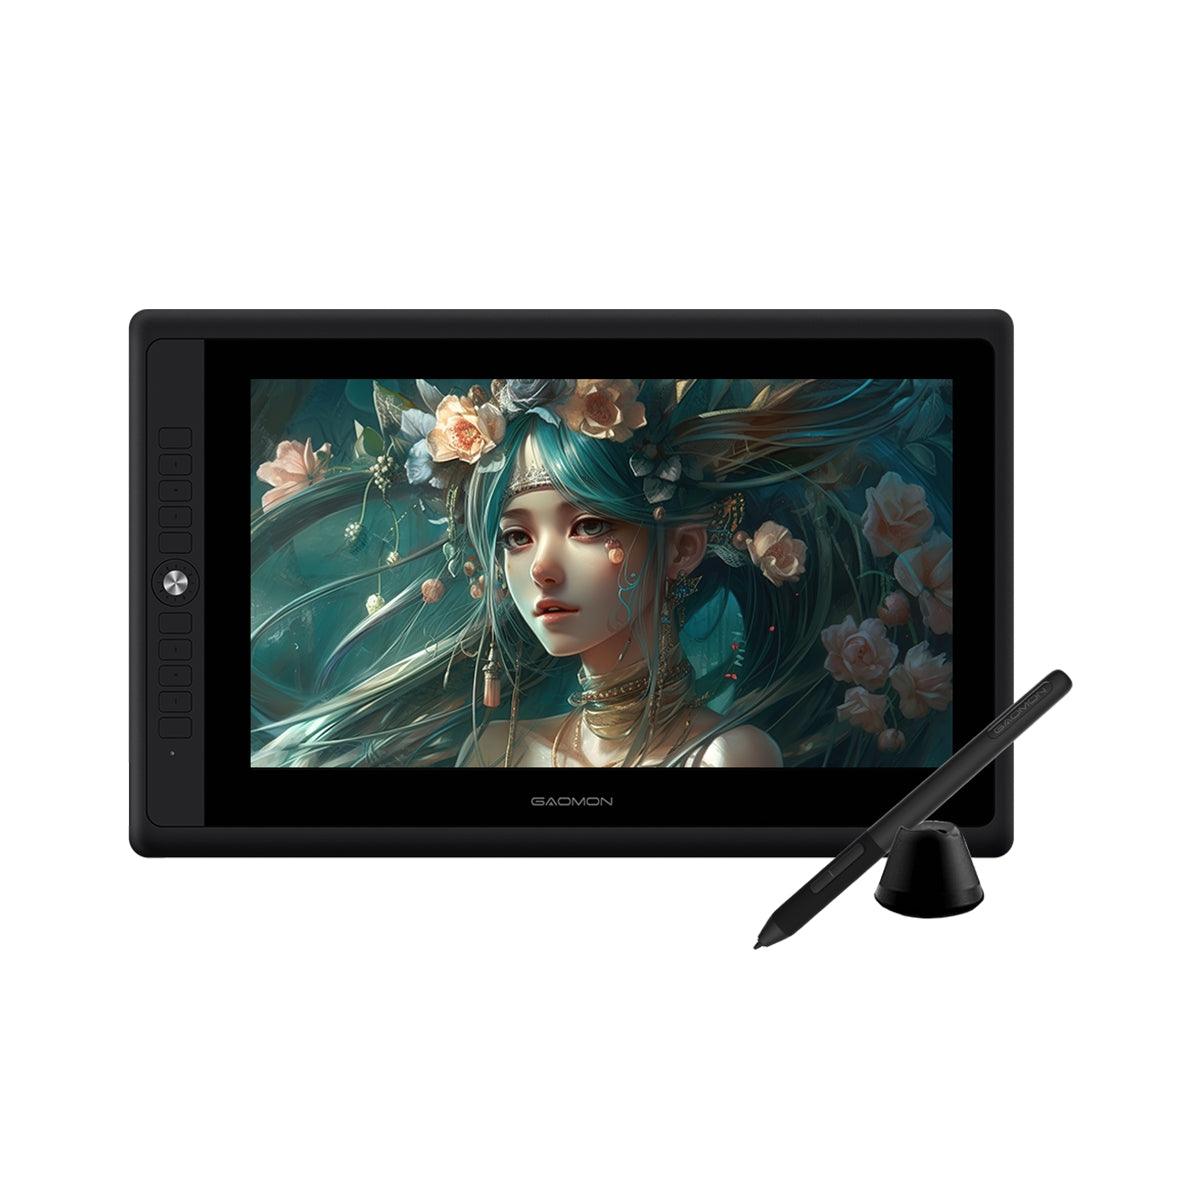 GAOMON PD156 Pro 15.6'' Digital Pen Display with Dial Function